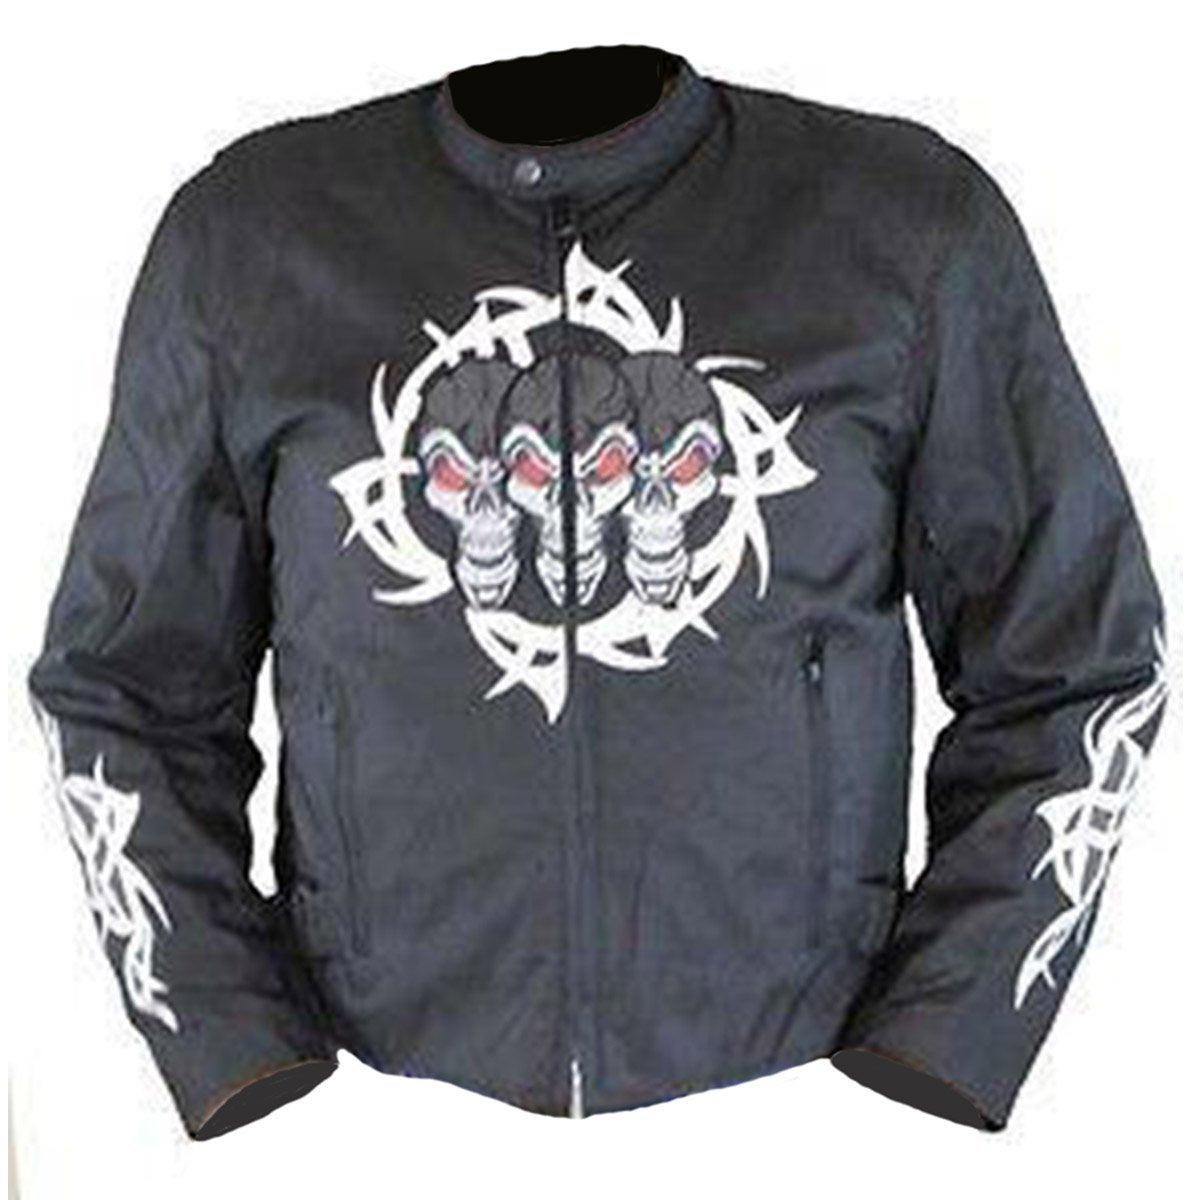 Vance Leather Armored Men's Textile Jacket with Reflective Skull